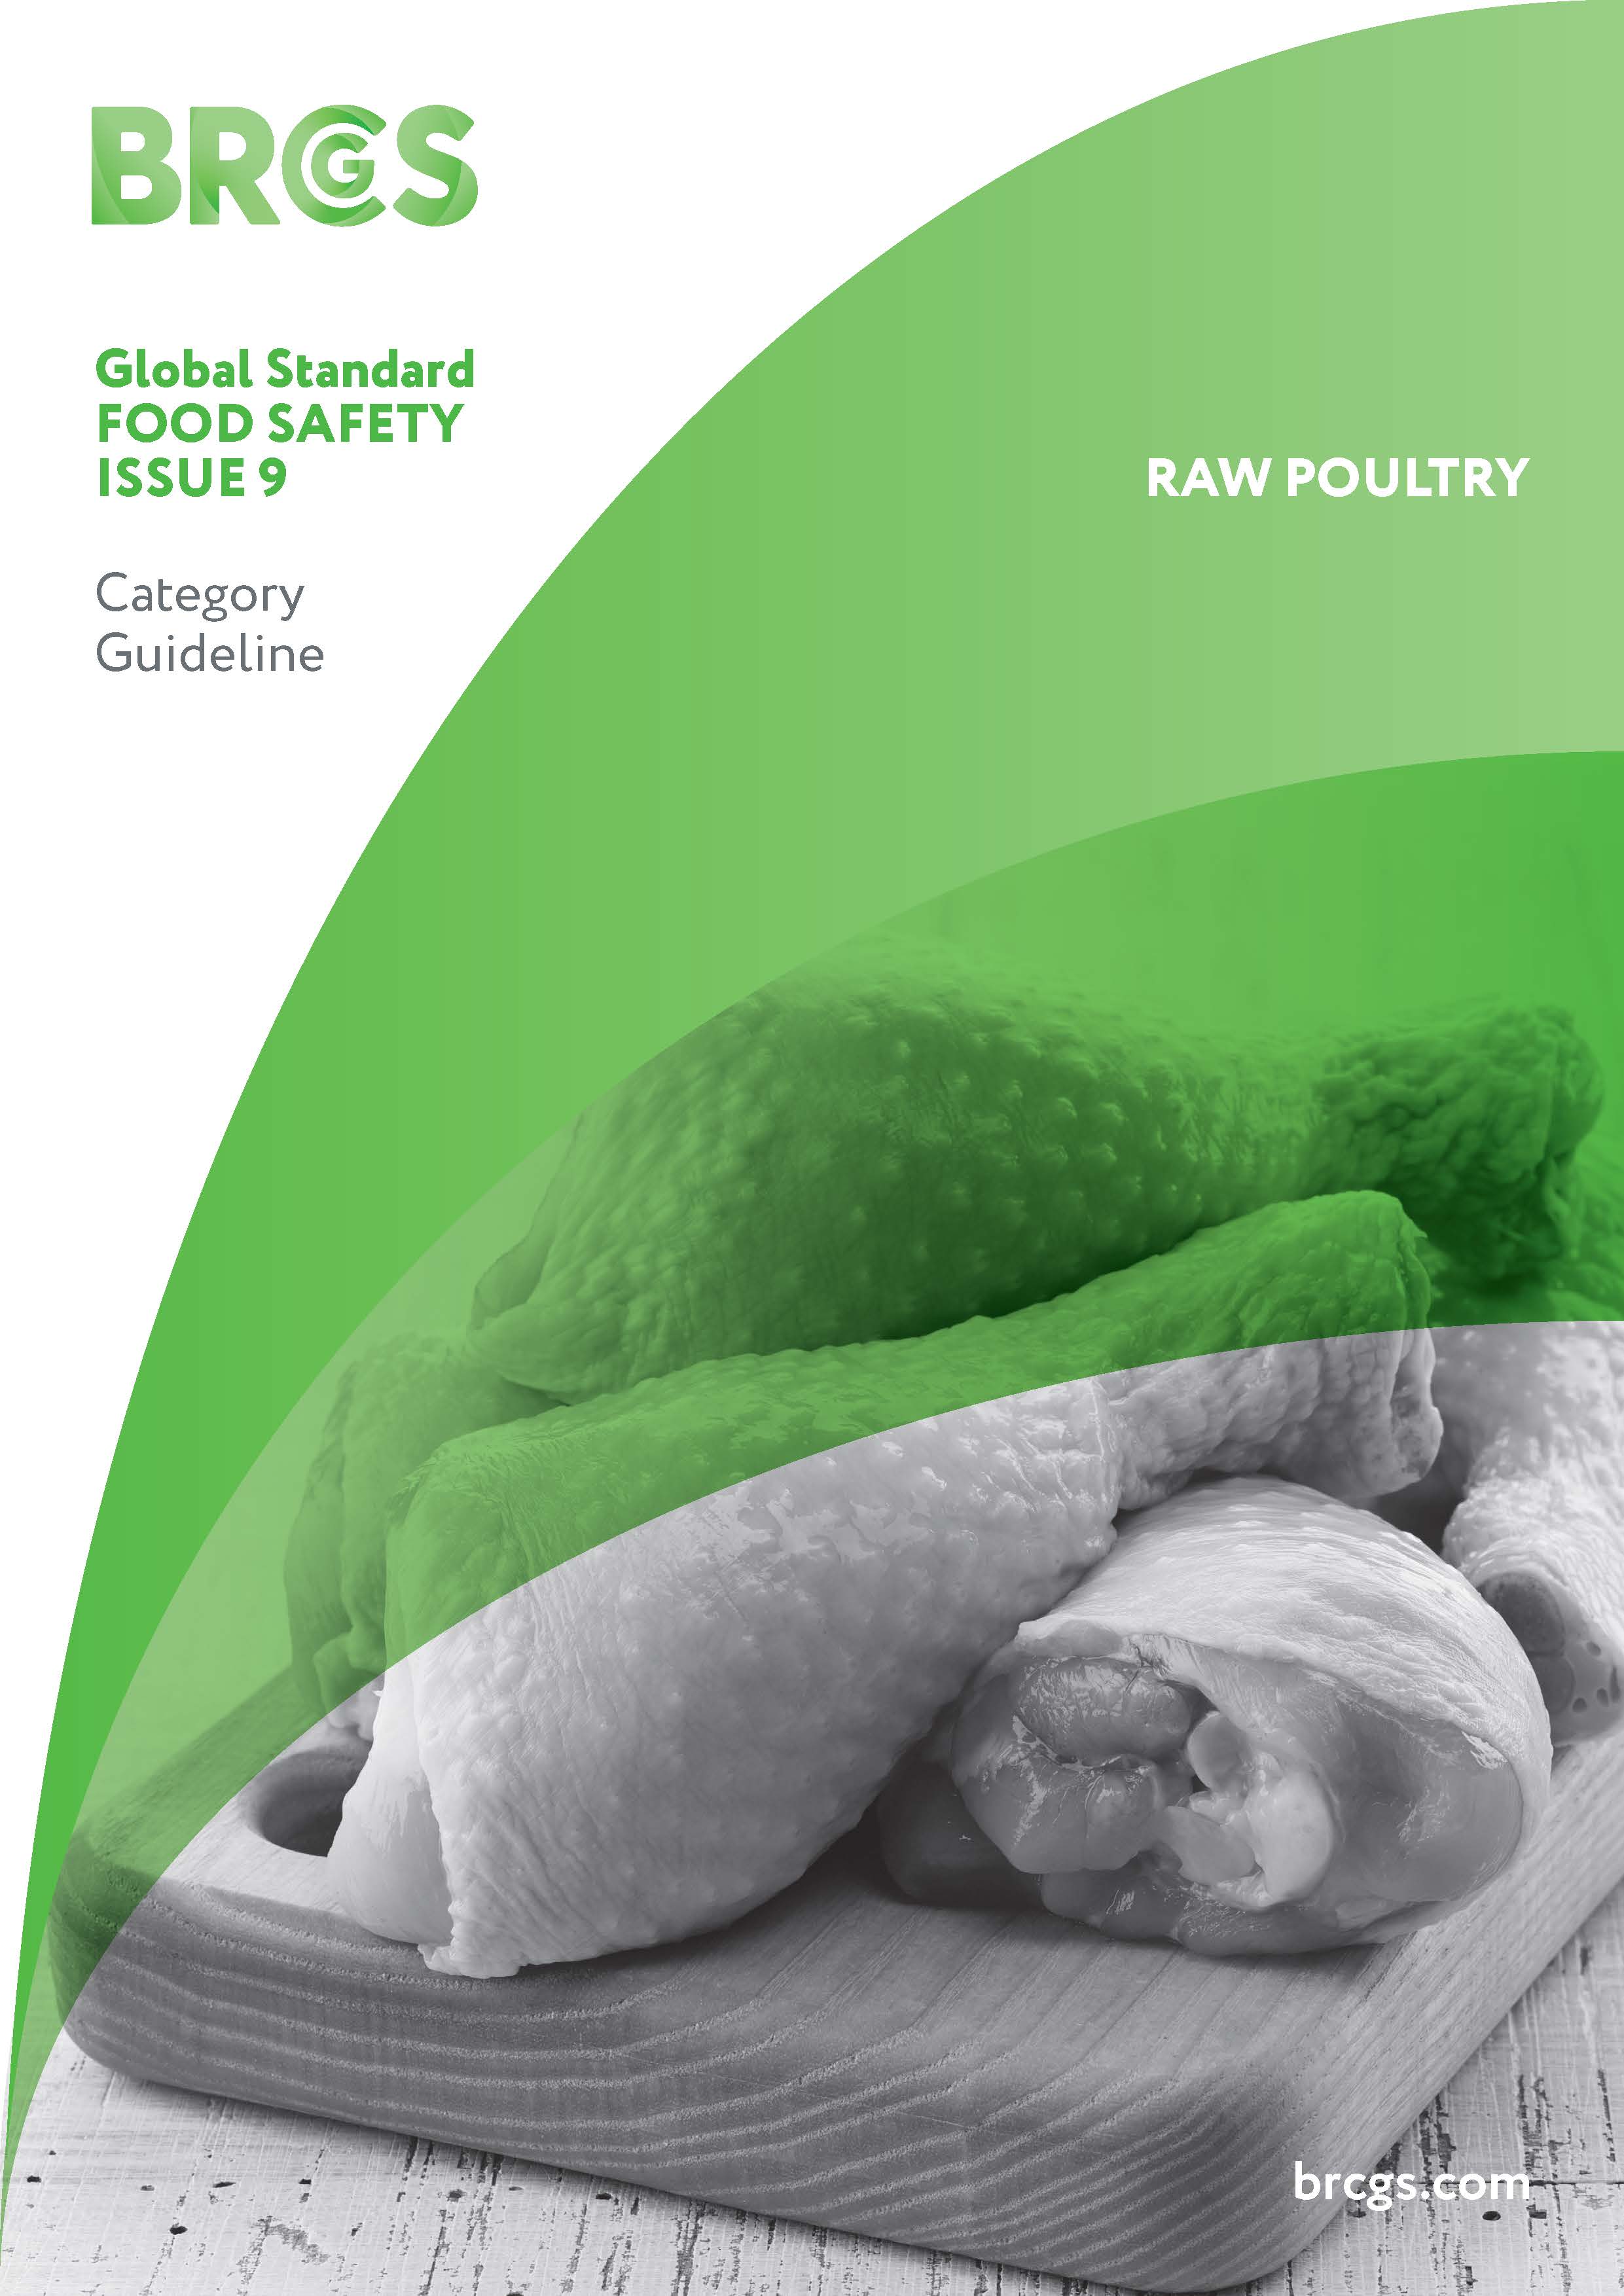 Guideline for Category 2 - Raw Poultry